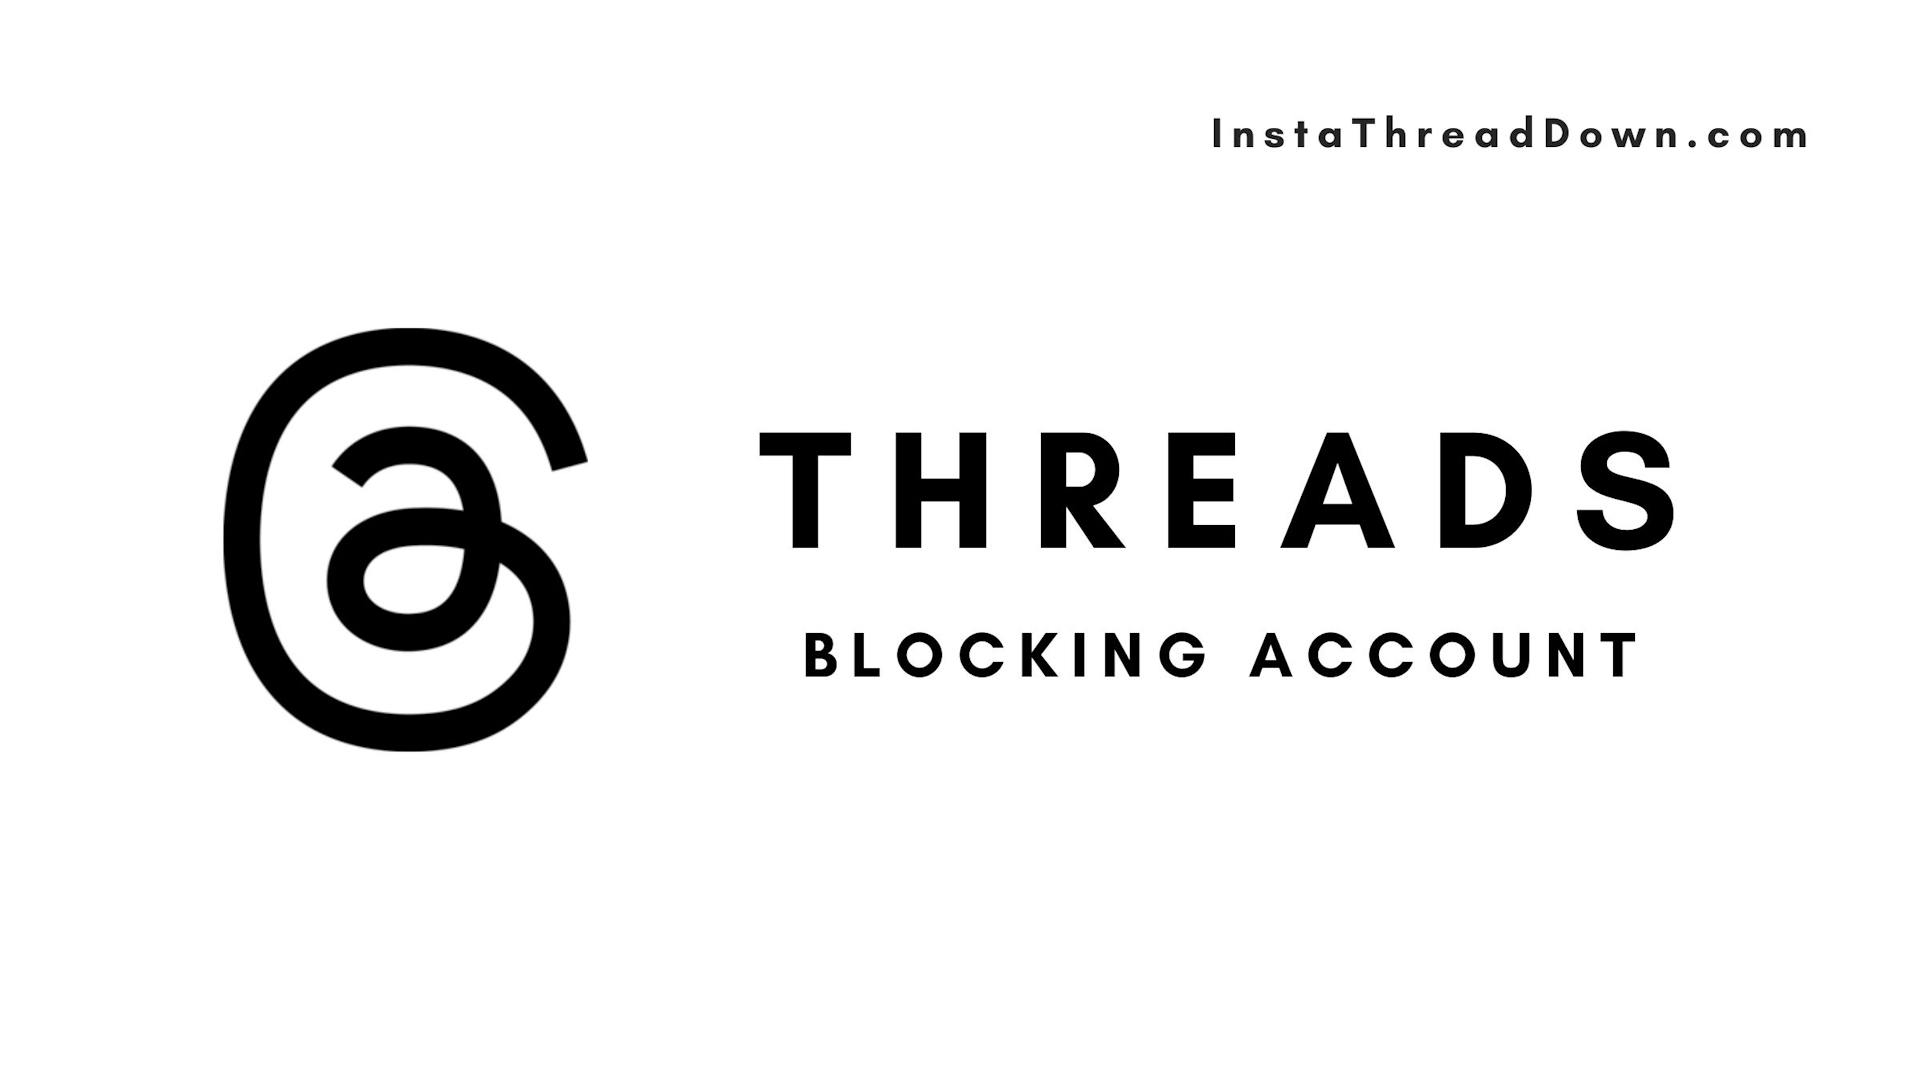 How to Block Accounts on Threads by Instagram